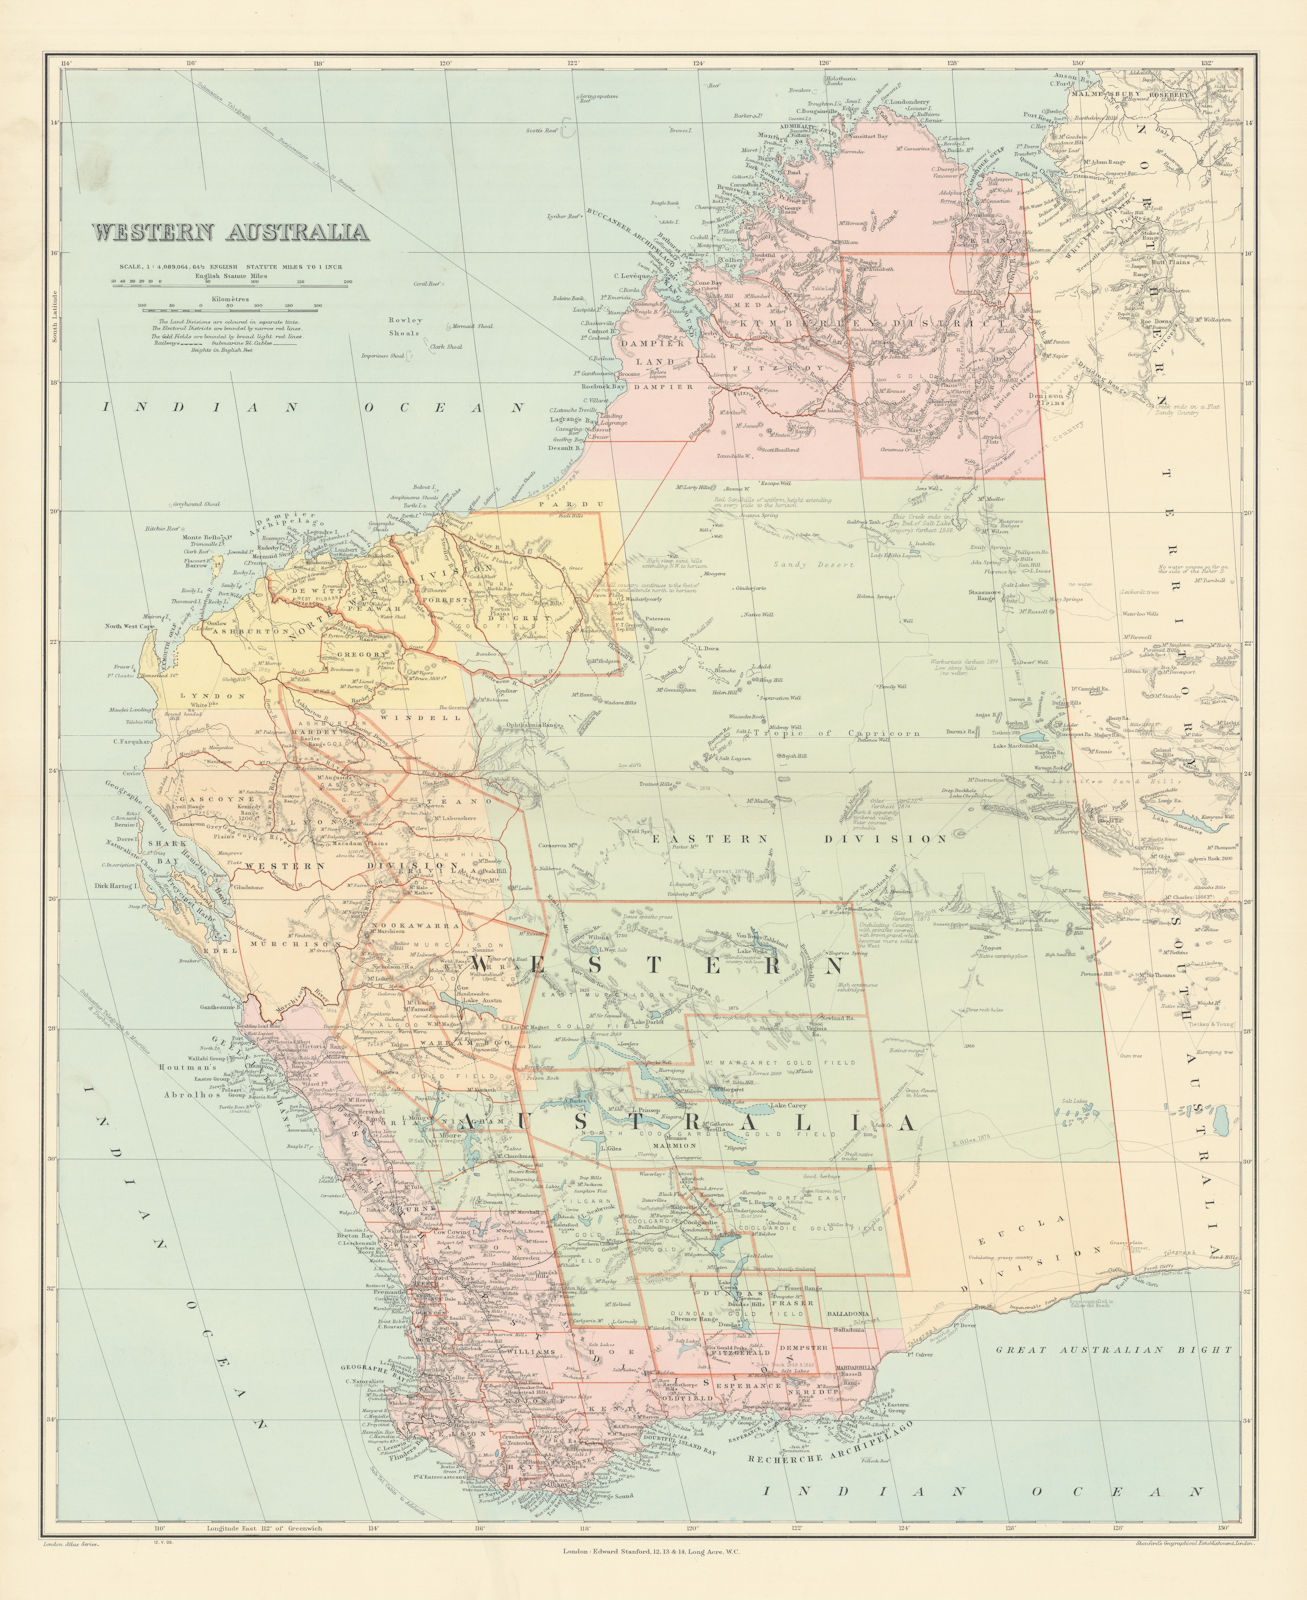 Associate Product Western Australia. Districts. Explorers' routes. Large 66x55cm STANFORD 1904 map